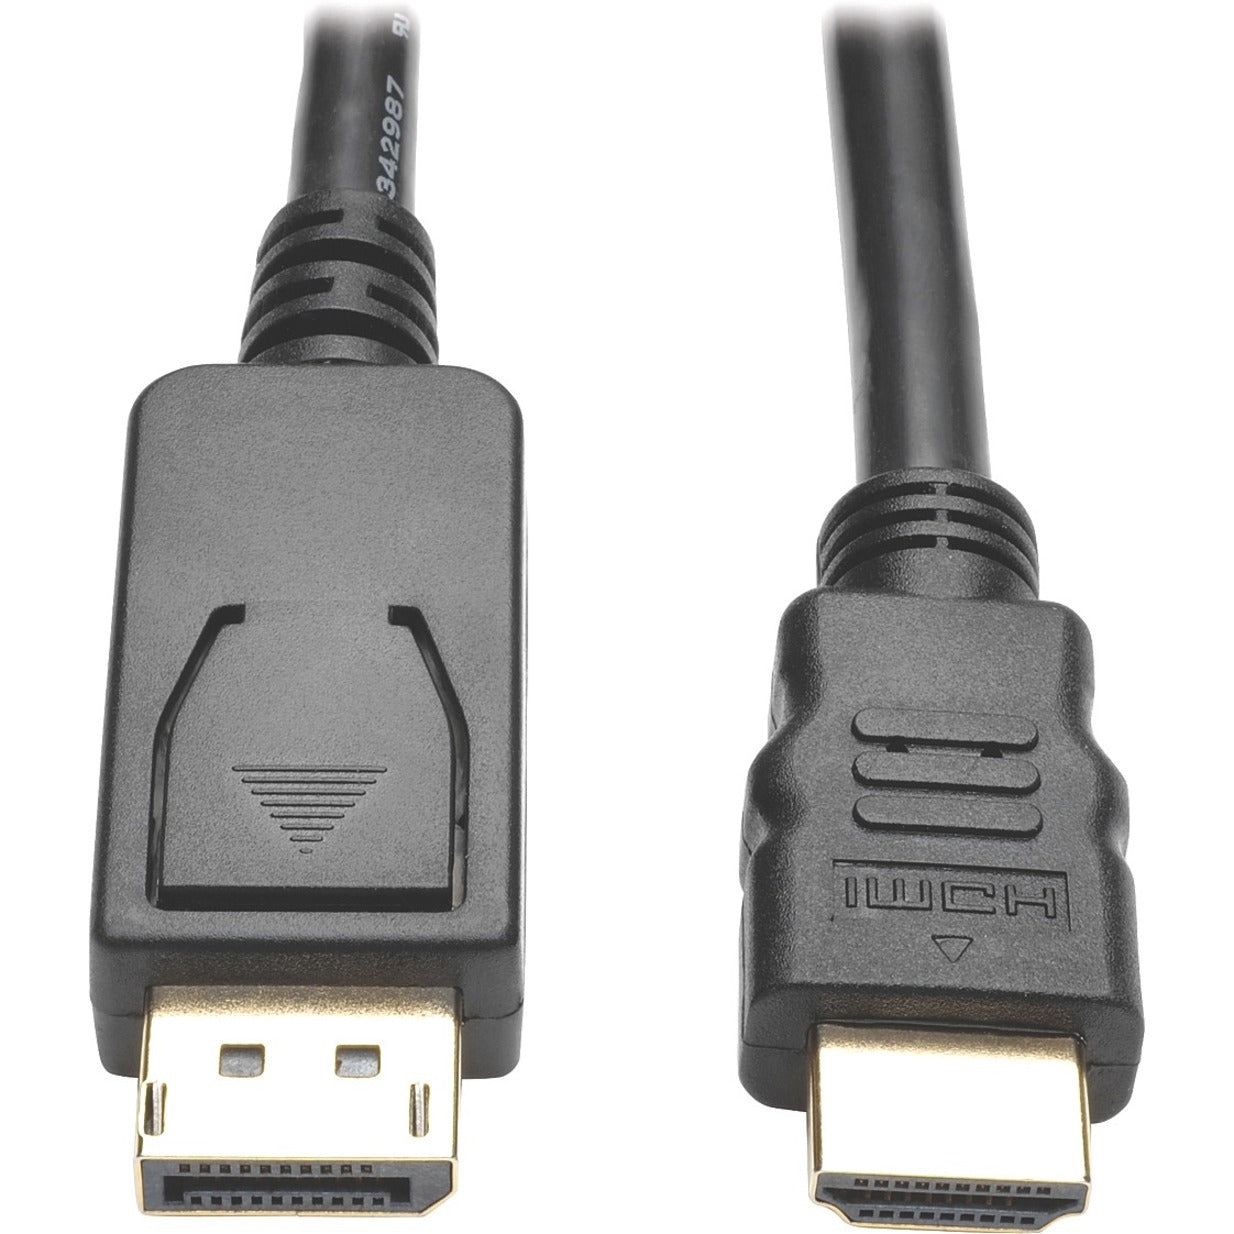 Tripp Lite P582-006-V2-ACT DisplayPort/HDMI Cable, 6 ft, Active, Gold Plated